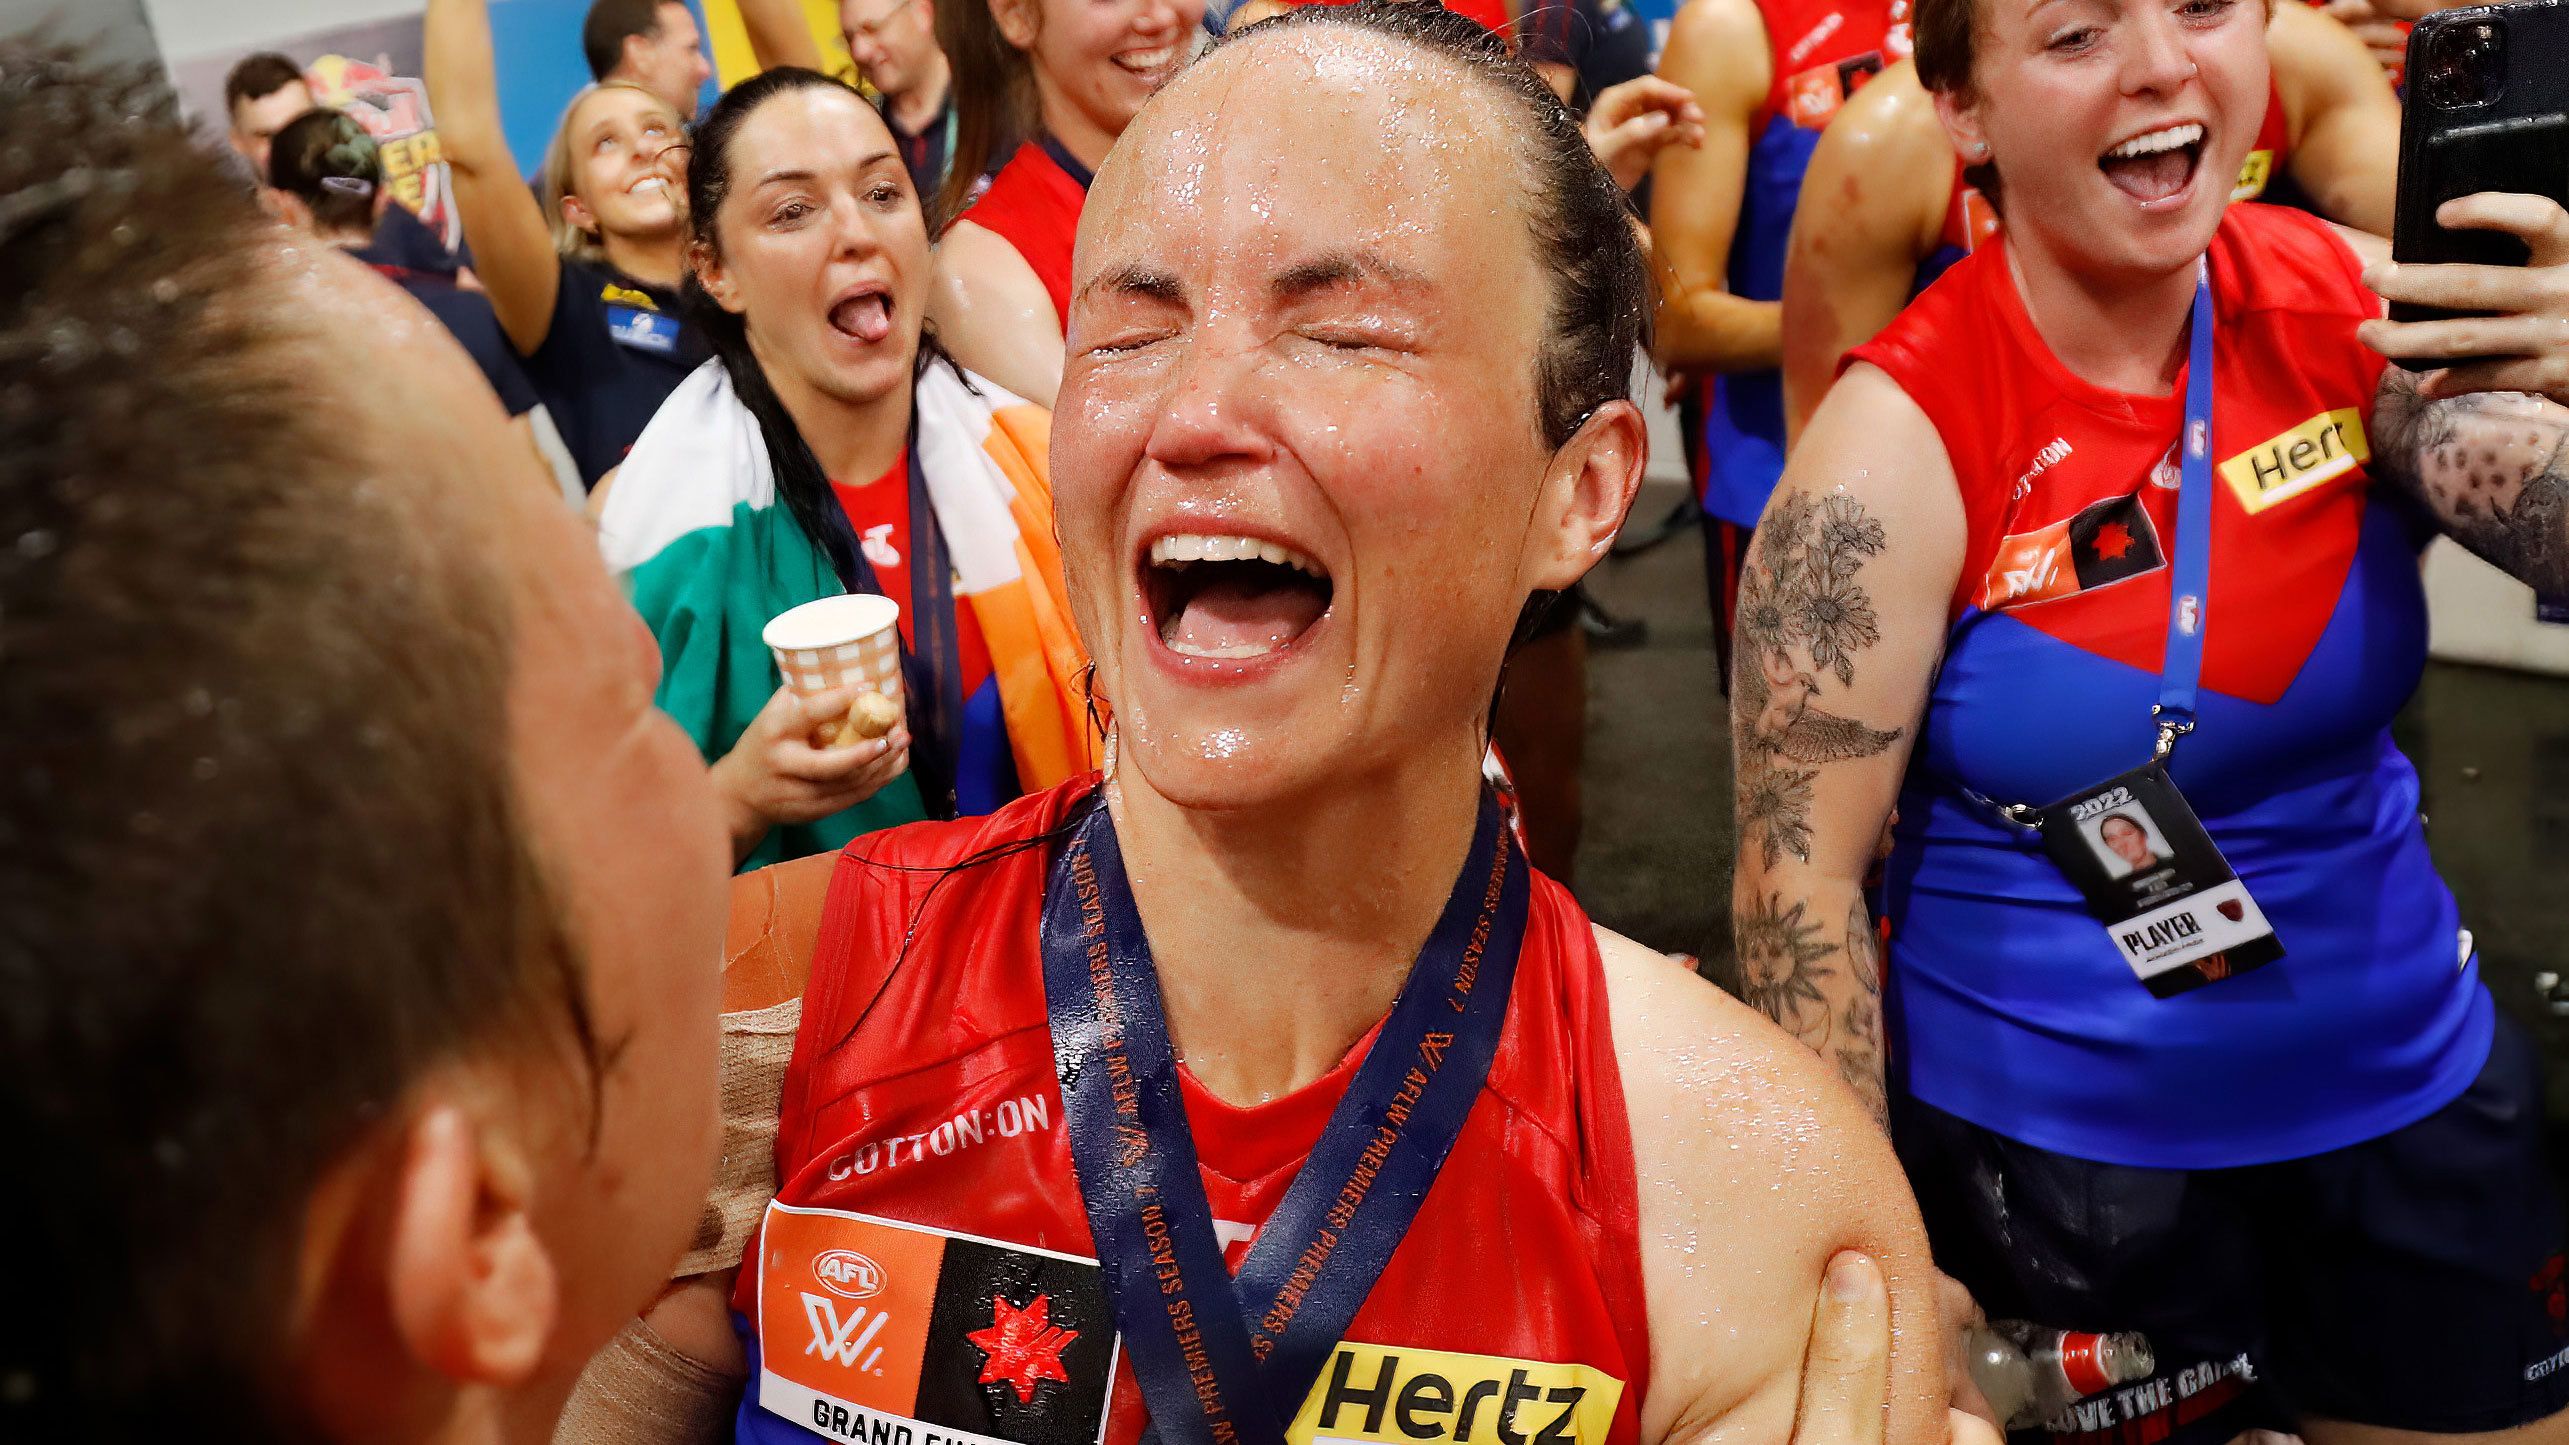 Melbourne Demons legend Daisy Pearce retires 'with a very full heart'